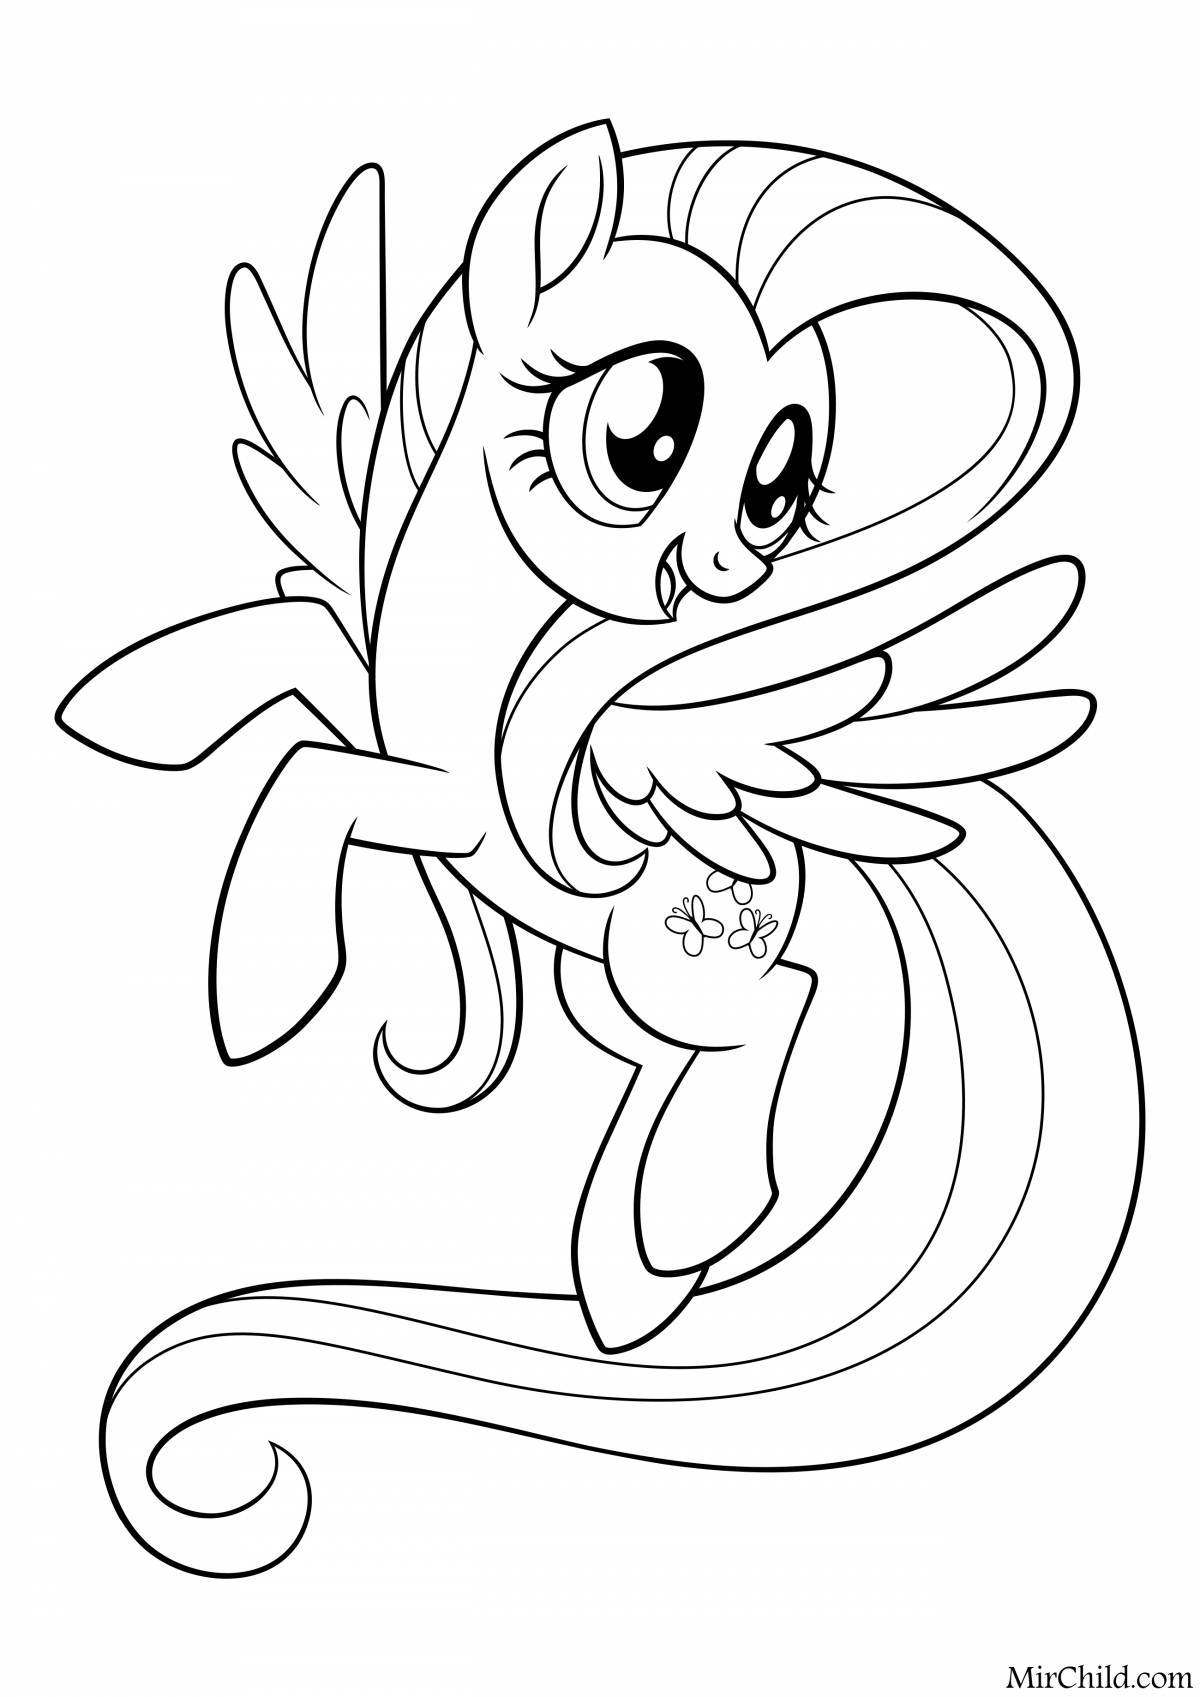 Fantastic my little pony coloring page